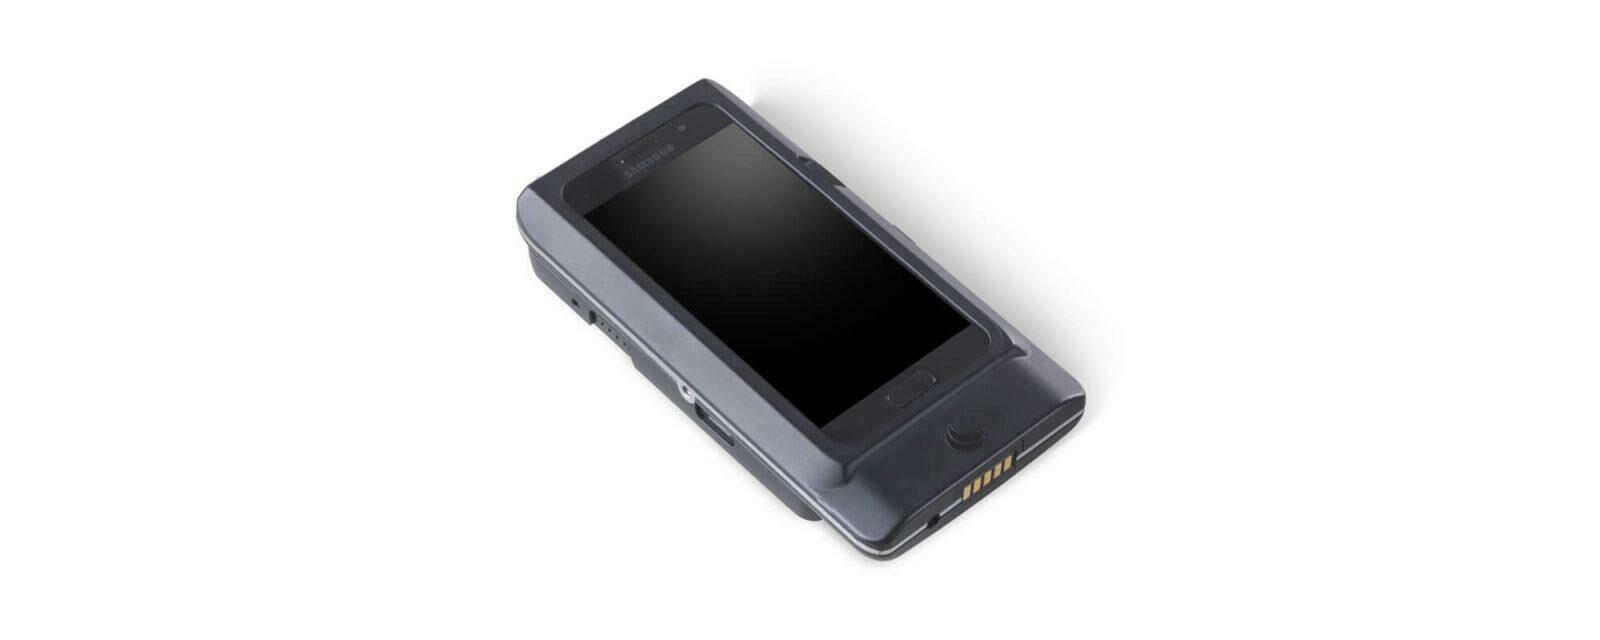 Mobile payment terminal connected to smartphone